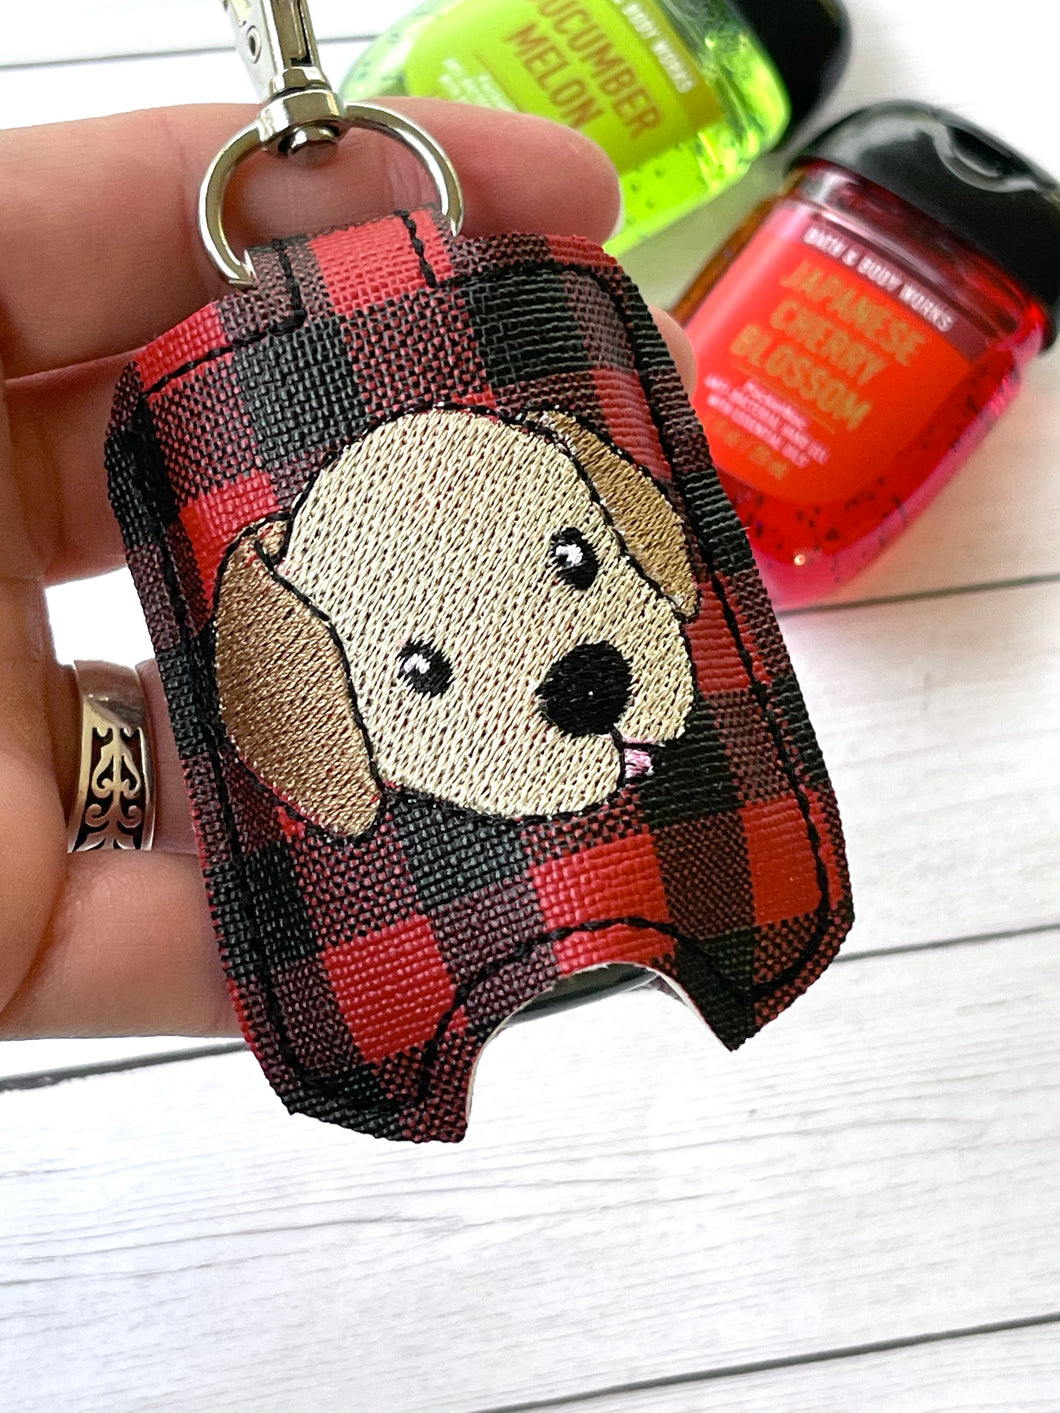 Lab Puppy Hand Sanitizer Holder Snap Tab Version In the Hoop Embroidery Project 1 oz BBW for 5x7 hoops